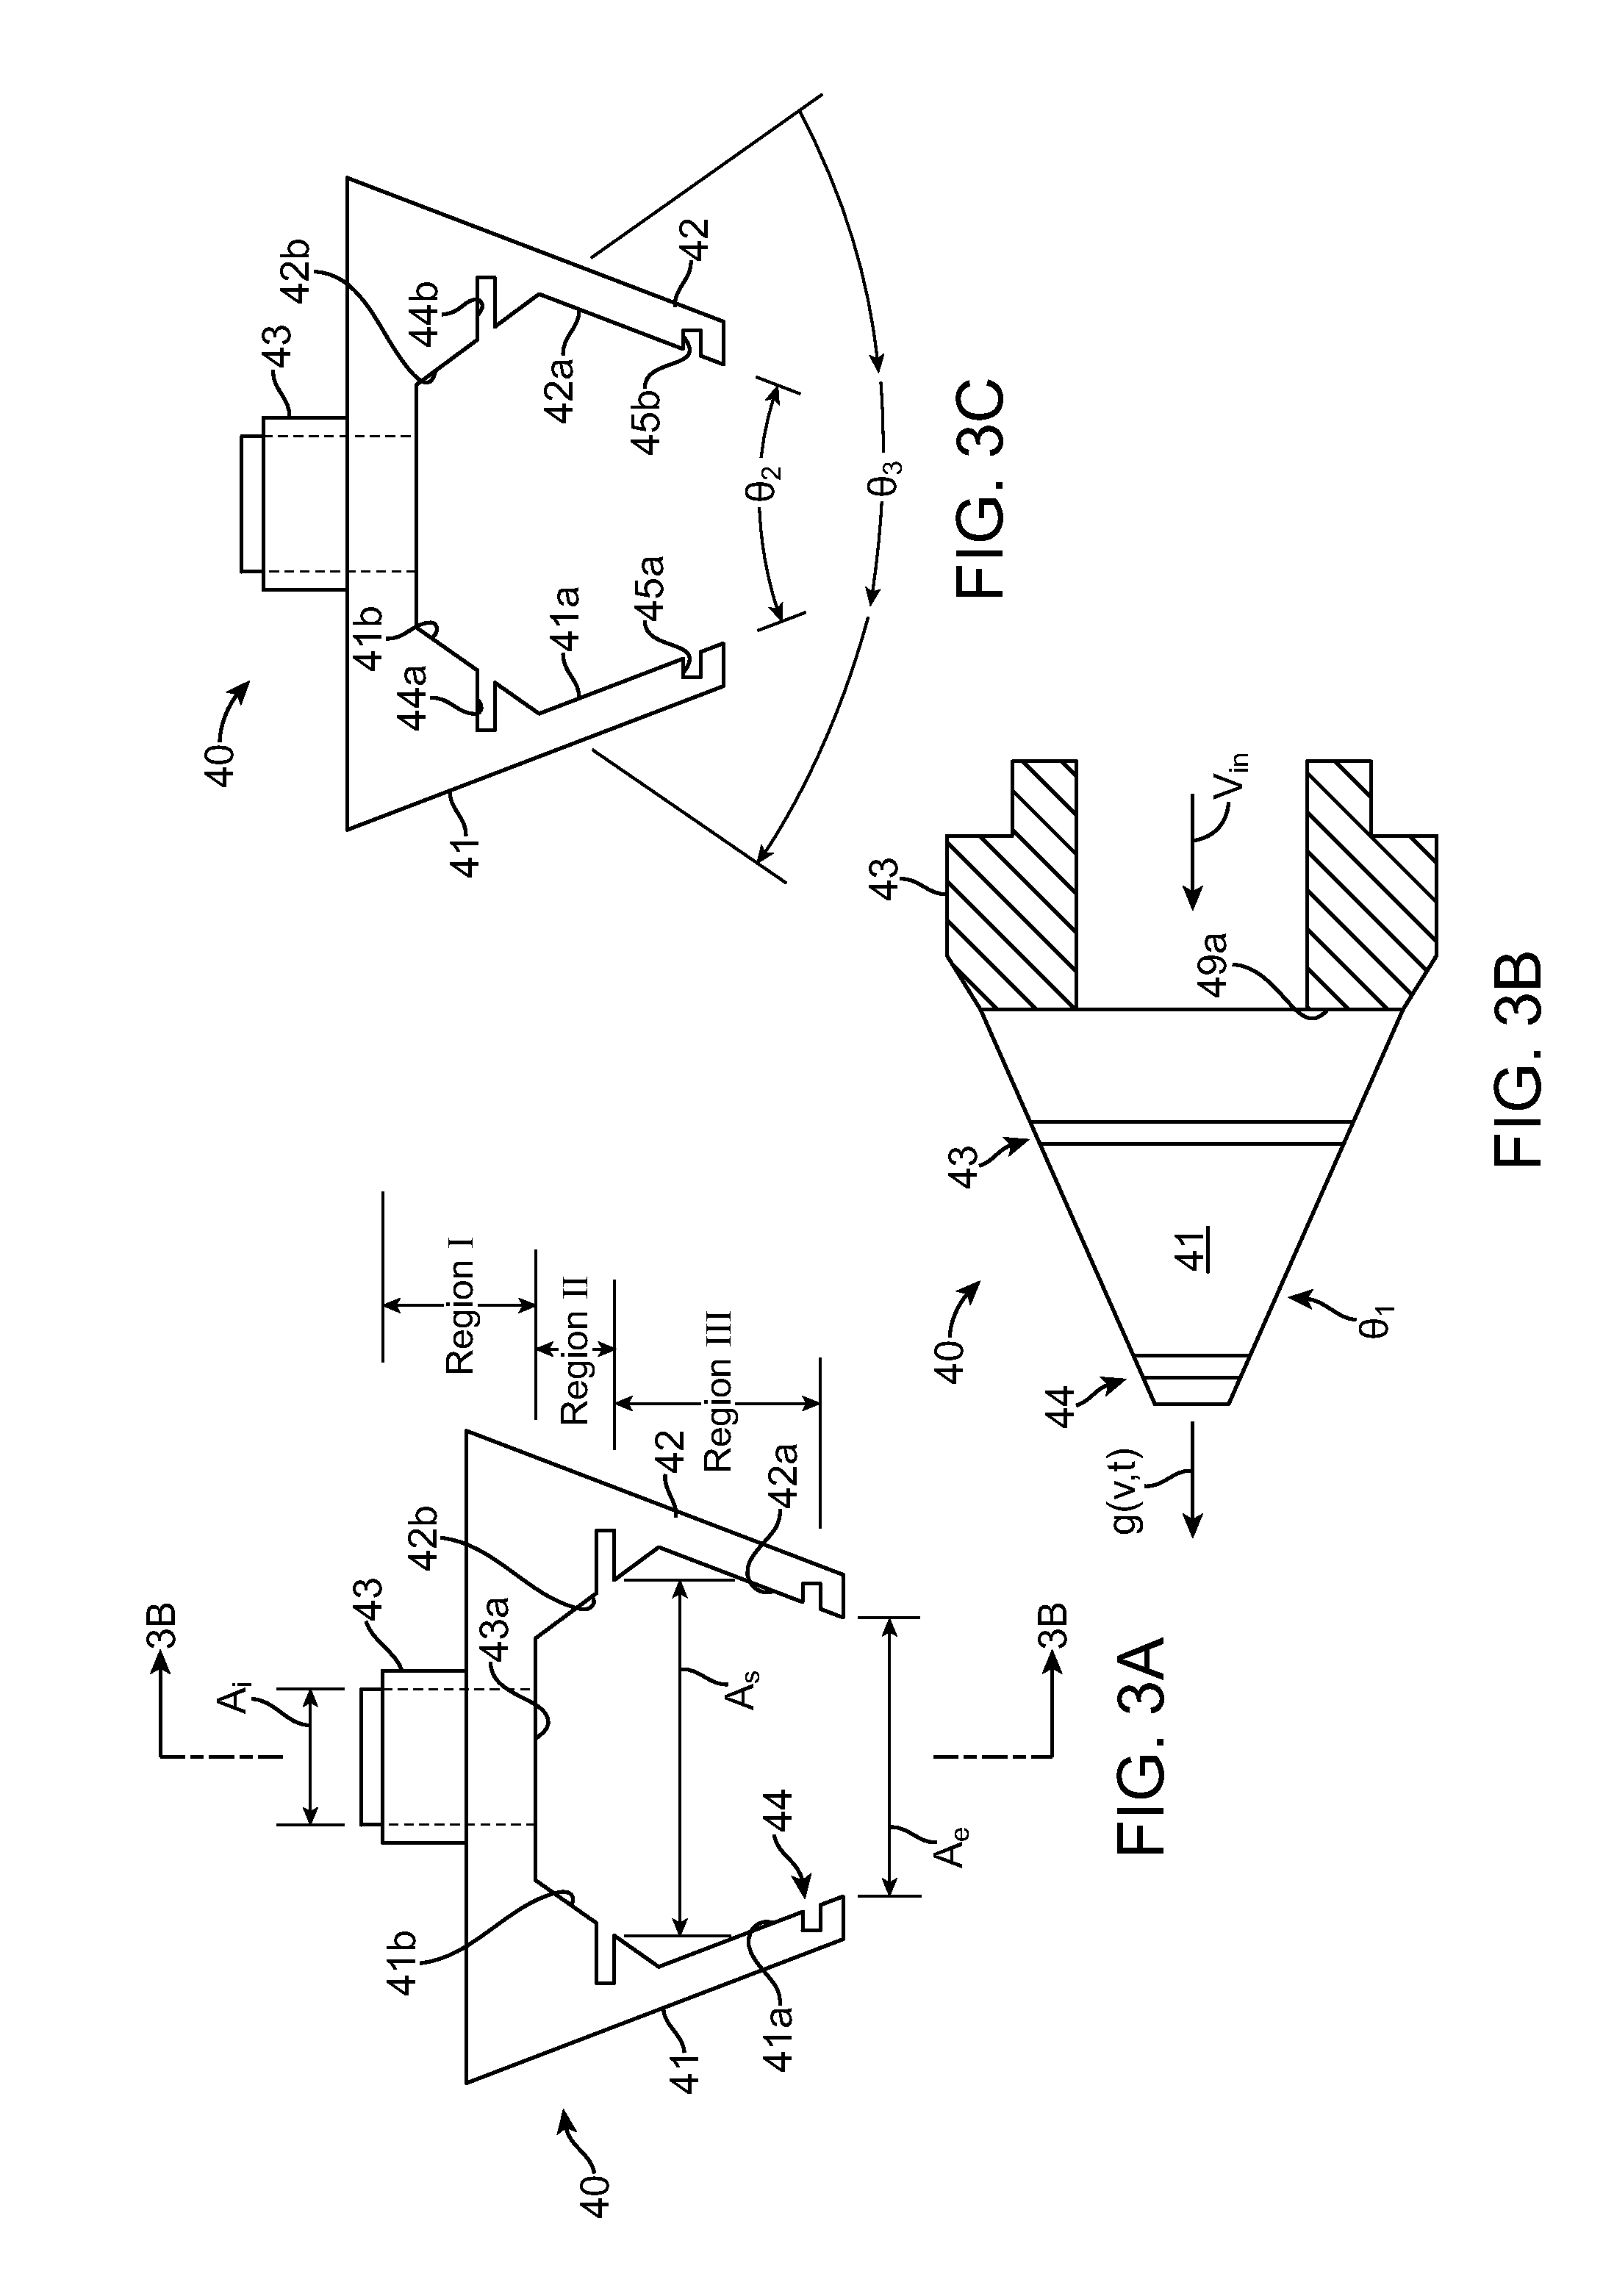 Removing A Solvent From A Drug-Eluting Coating